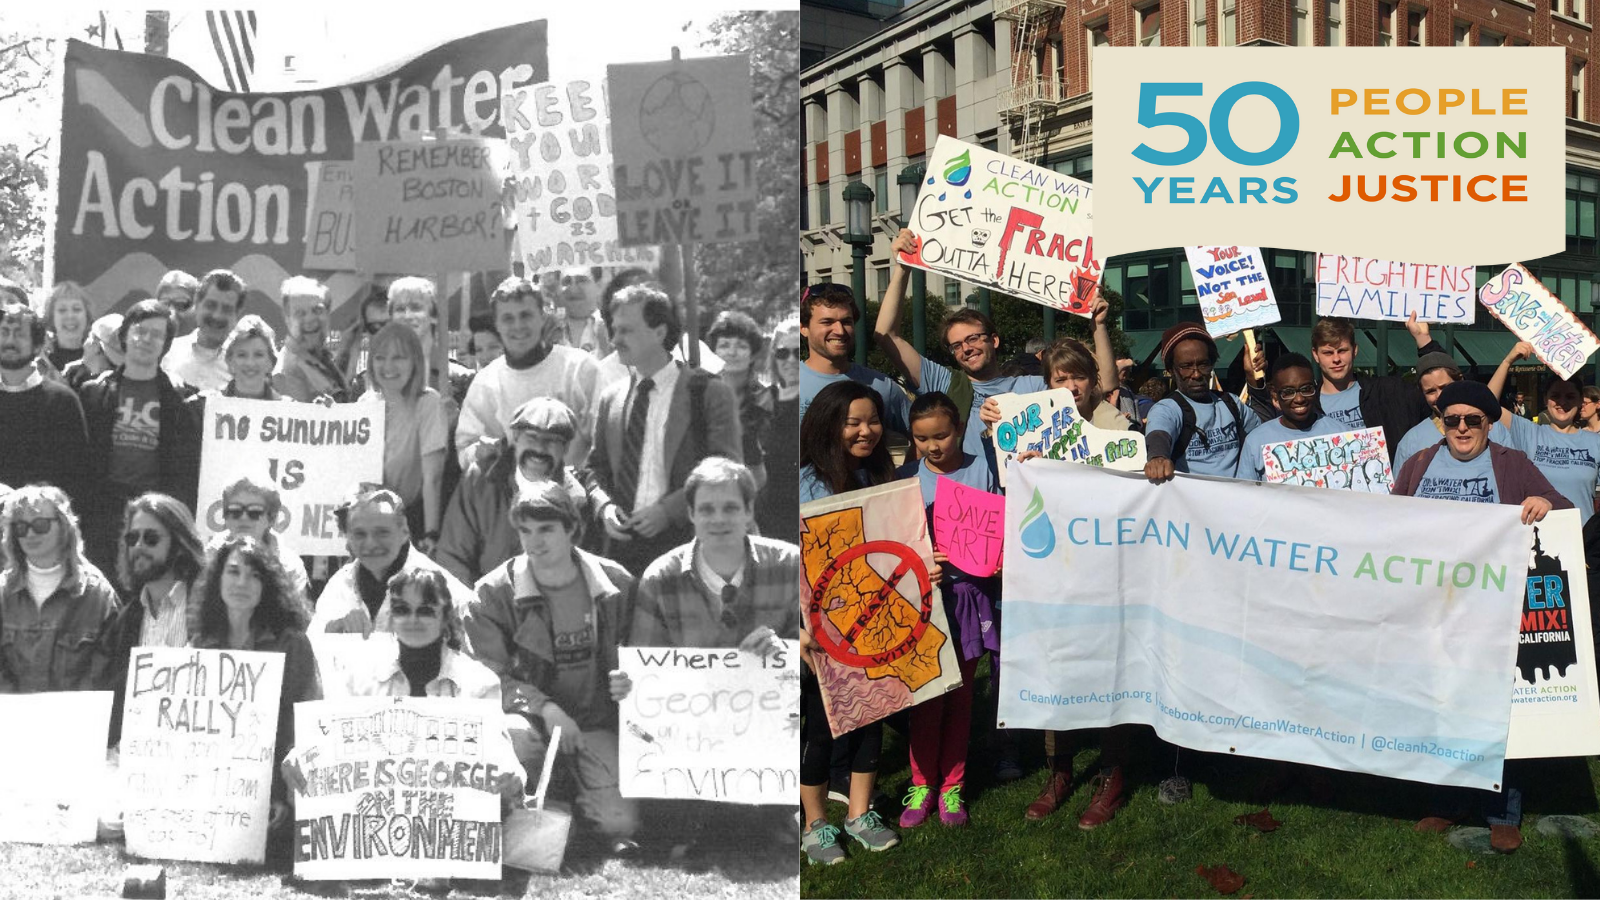 Image: A Clean Water Action Rally in the 80s side by side with a Clean Water Action Rally in the 2010s